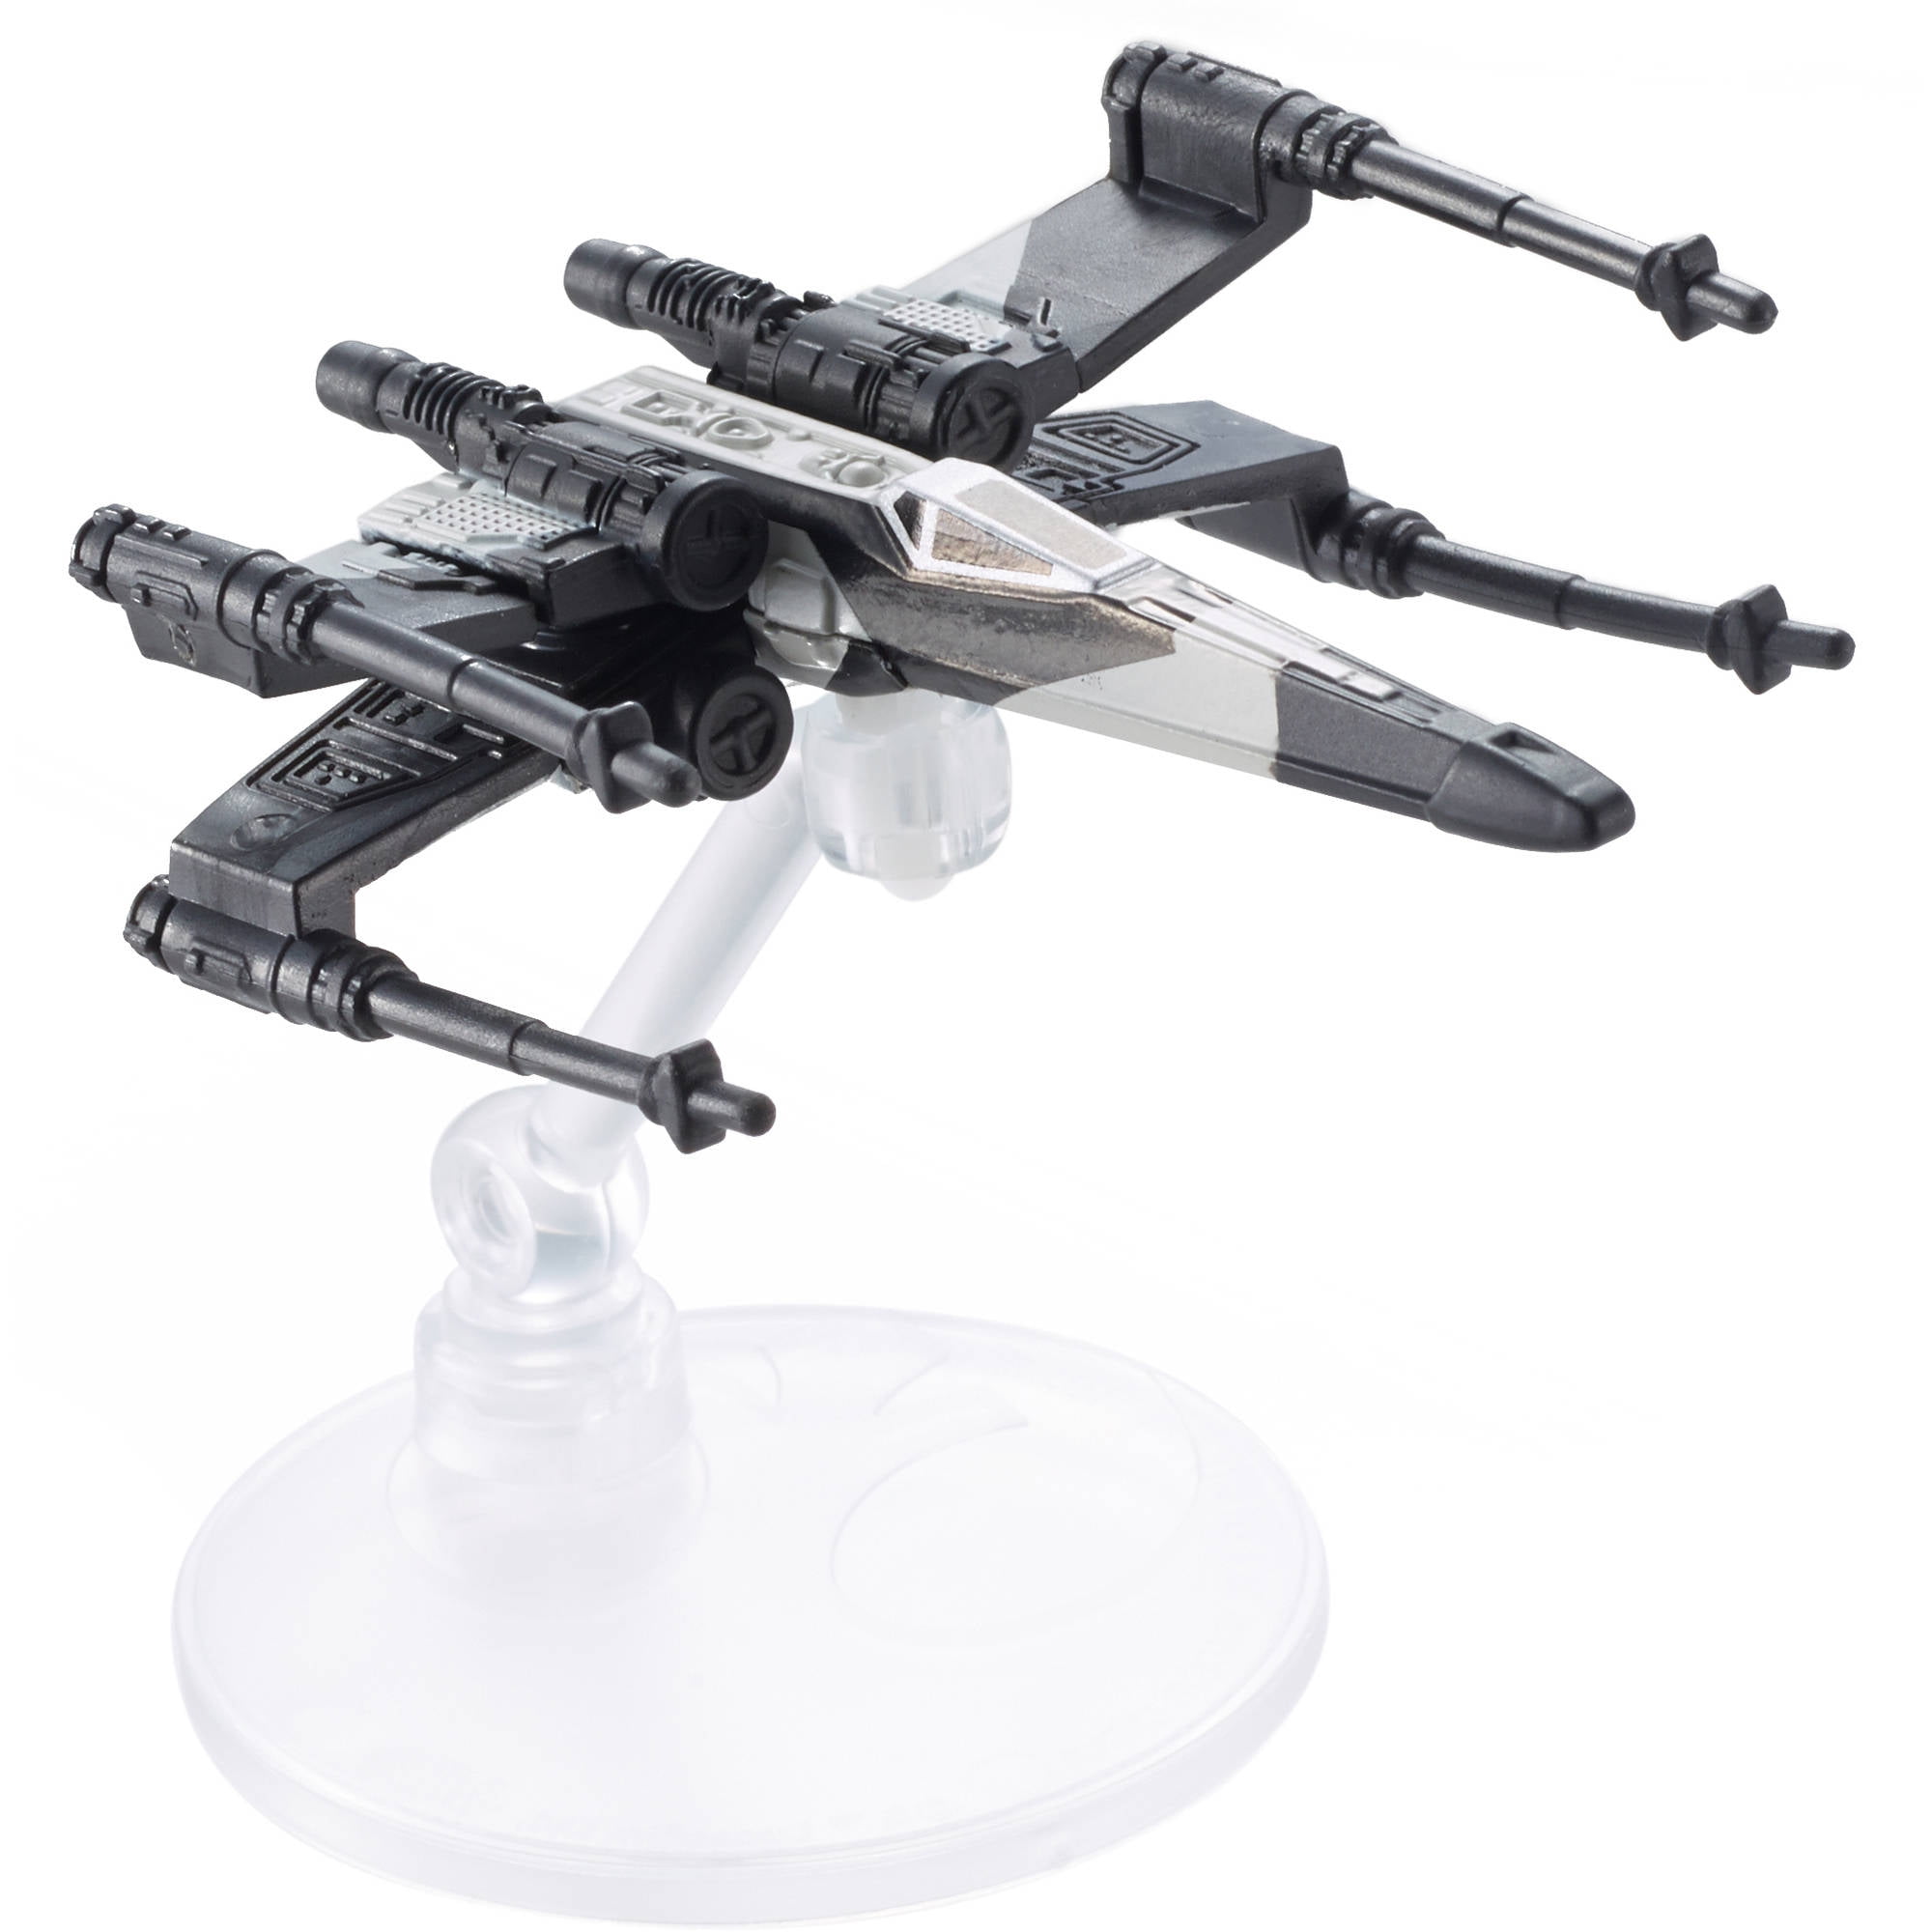 Star Wars Rebels Hot Wheels A-Wing Fighter with Flight Stand 